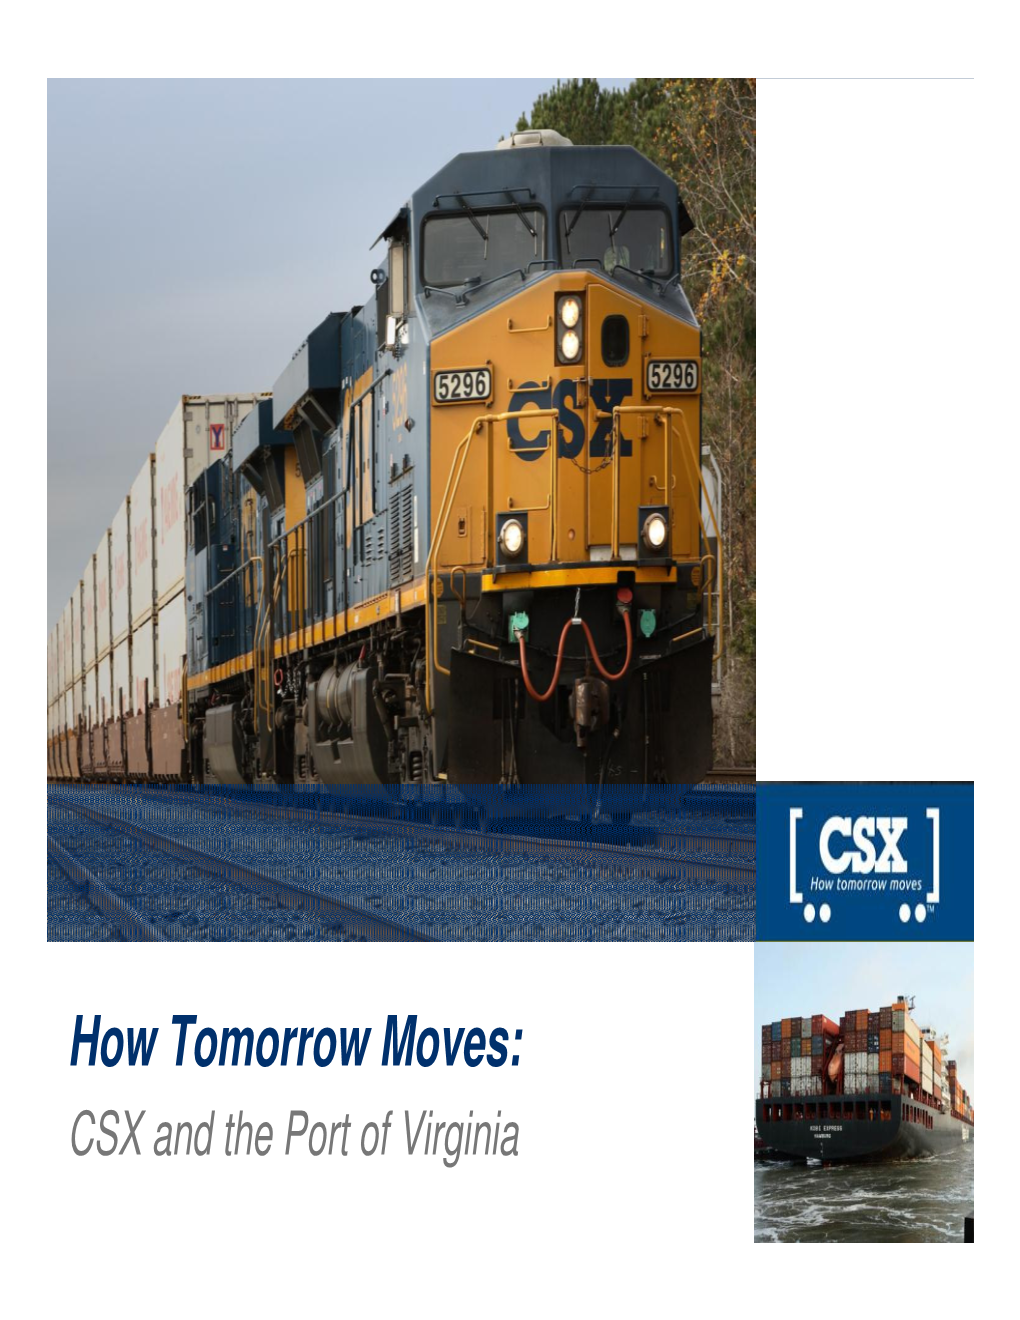 How Tomorrow Moves: CSX and the Port of Virginia Challenge: Significant Freight Growth Projected